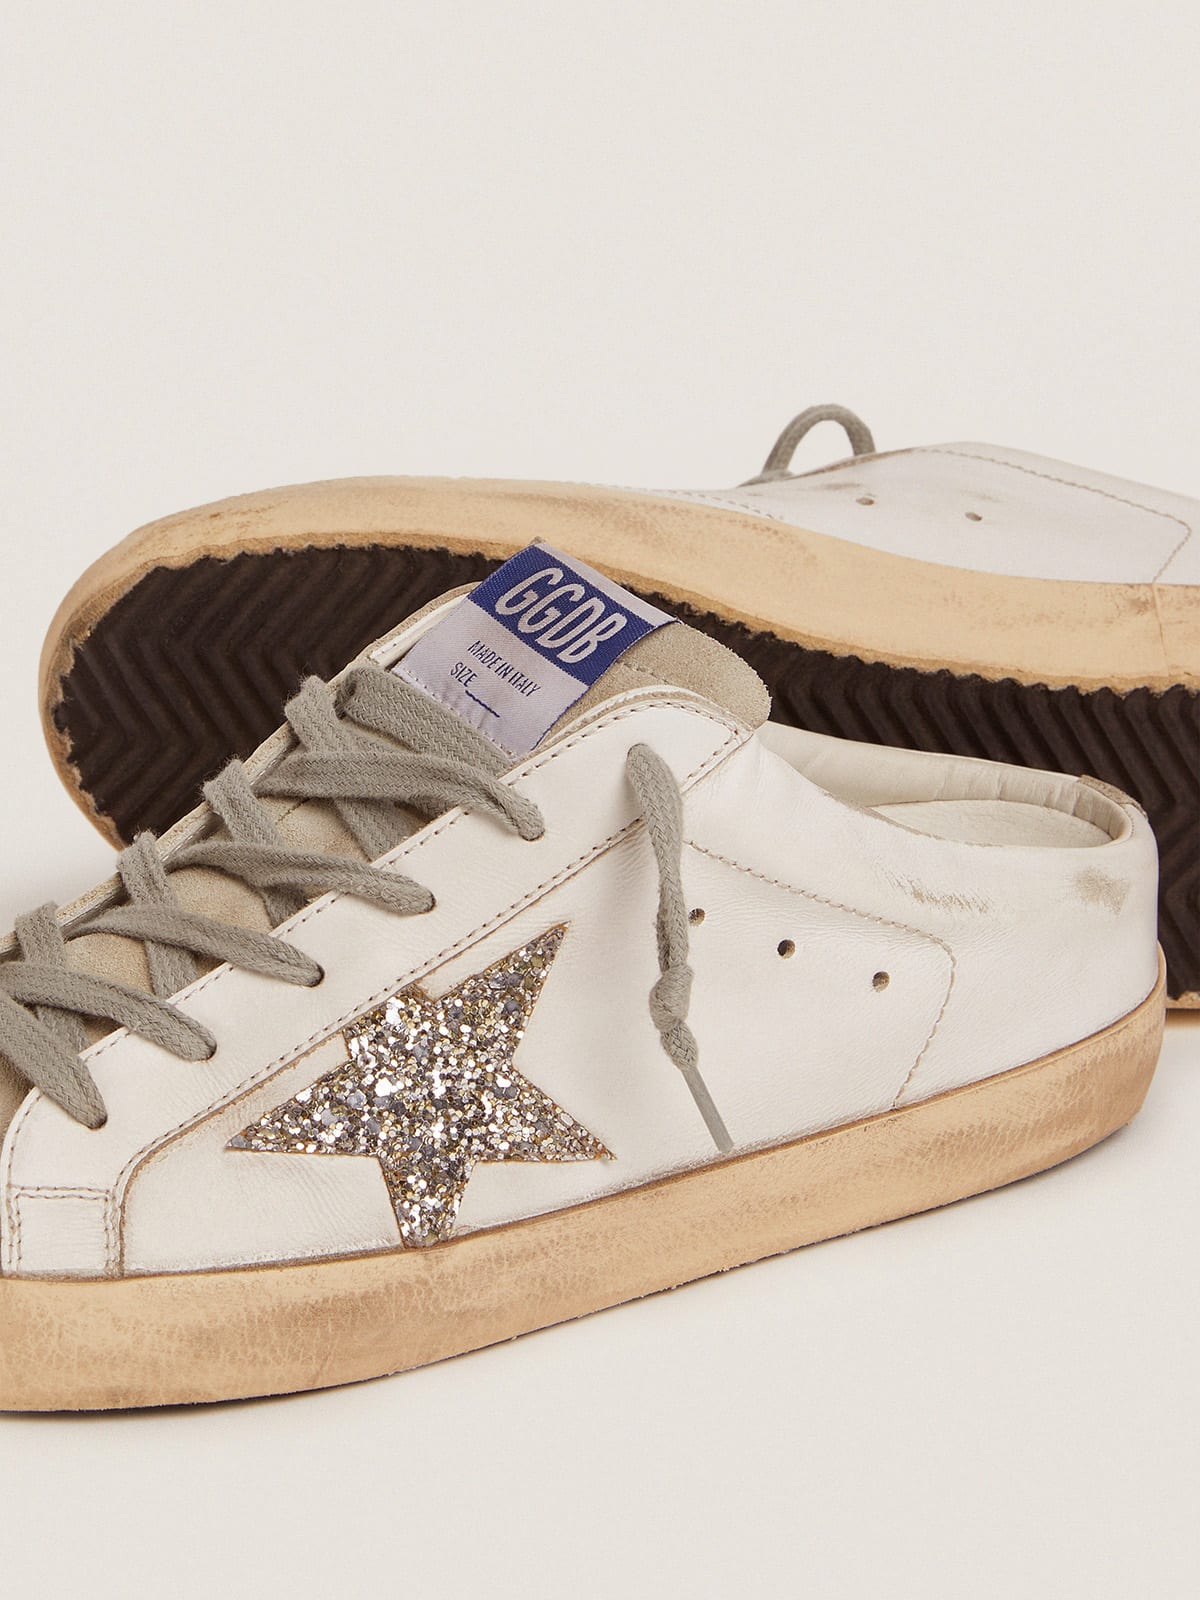 Golden Goose - Super-Star Sabots in white leather and gray suede with silver glitter star in 